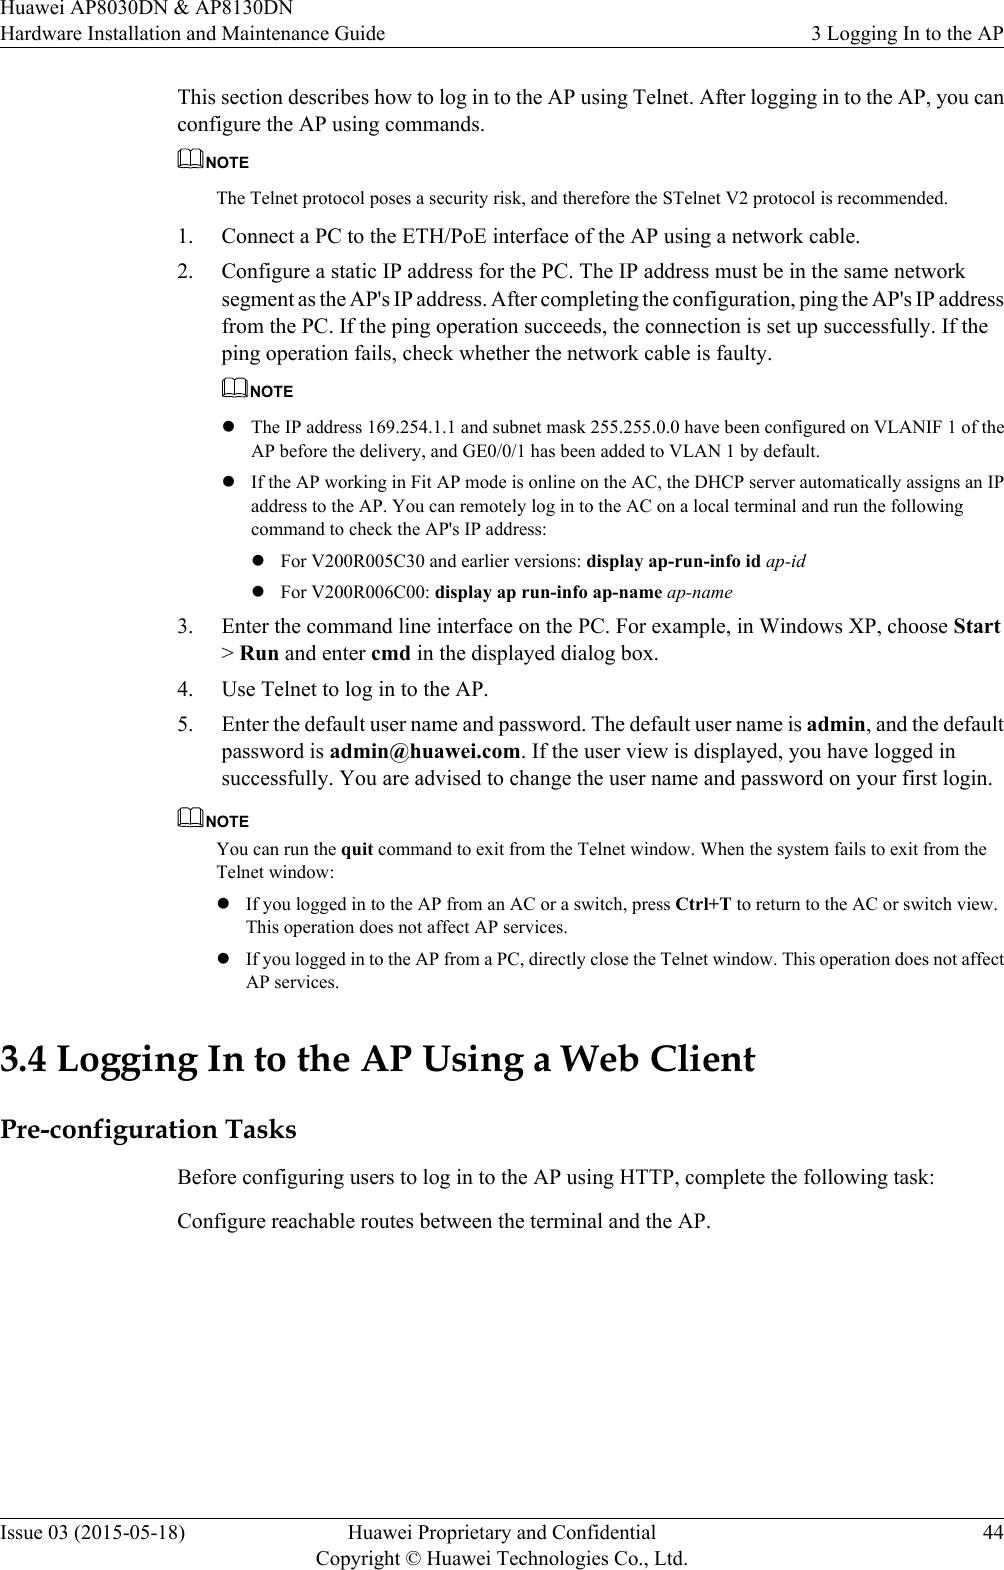 This section describes how to log in to the AP using Telnet. After logging in to the AP, you canconfigure the AP using commands.NOTEThe Telnet protocol poses a security risk, and therefore the STelnet V2 protocol is recommended.1. Connect a PC to the ETH/PoE interface of the AP using a network cable.2. Configure a static IP address for the PC. The IP address must be in the same networksegment as the AP&apos;s IP address. After completing the configuration, ping the AP&apos;s IP addressfrom the PC. If the ping operation succeeds, the connection is set up successfully. If theping operation fails, check whether the network cable is faulty.NOTElThe IP address 169.254.1.1 and subnet mask 255.255.0.0 have been configured on VLANIF 1 of theAP before the delivery, and GE0/0/1 has been added to VLAN 1 by default.lIf the AP working in Fit AP mode is online on the AC, the DHCP server automatically assigns an IPaddress to the AP. You can remotely log in to the AC on a local terminal and run the followingcommand to check the AP&apos;s IP address:lFor V200R005C30 and earlier versions: display ap-run-info id ap-idlFor V200R006C00: display ap run-info ap-name ap-name3. Enter the command line interface on the PC. For example, in Windows XP, choose Start&gt; Run and enter cmd in the displayed dialog box.4. Use Telnet to log in to the AP.5. Enter the default user name and password. The default user name is admin, and the defaultpassword is admin@huawei.com. If the user view is displayed, you have logged insuccessfully. You are advised to change the user name and password on your first login.NOTEYou can run the quit command to exit from the Telnet window. When the system fails to exit from theTelnet window:lIf you logged in to the AP from an AC or a switch, press Ctrl+T to return to the AC or switch view.This operation does not affect AP services.lIf you logged in to the AP from a PC, directly close the Telnet window. This operation does not affectAP services.3.4 Logging In to the AP Using a Web ClientPre-configuration TasksBefore configuring users to log in to the AP using HTTP, complete the following task:Configure reachable routes between the terminal and the AP.Huawei AP8030DN &amp; AP8130DNHardware Installation and Maintenance Guide 3 Logging In to the APIssue 03 (2015-05-18) Huawei Proprietary and ConfidentialCopyright © Huawei Technologies Co., Ltd.44